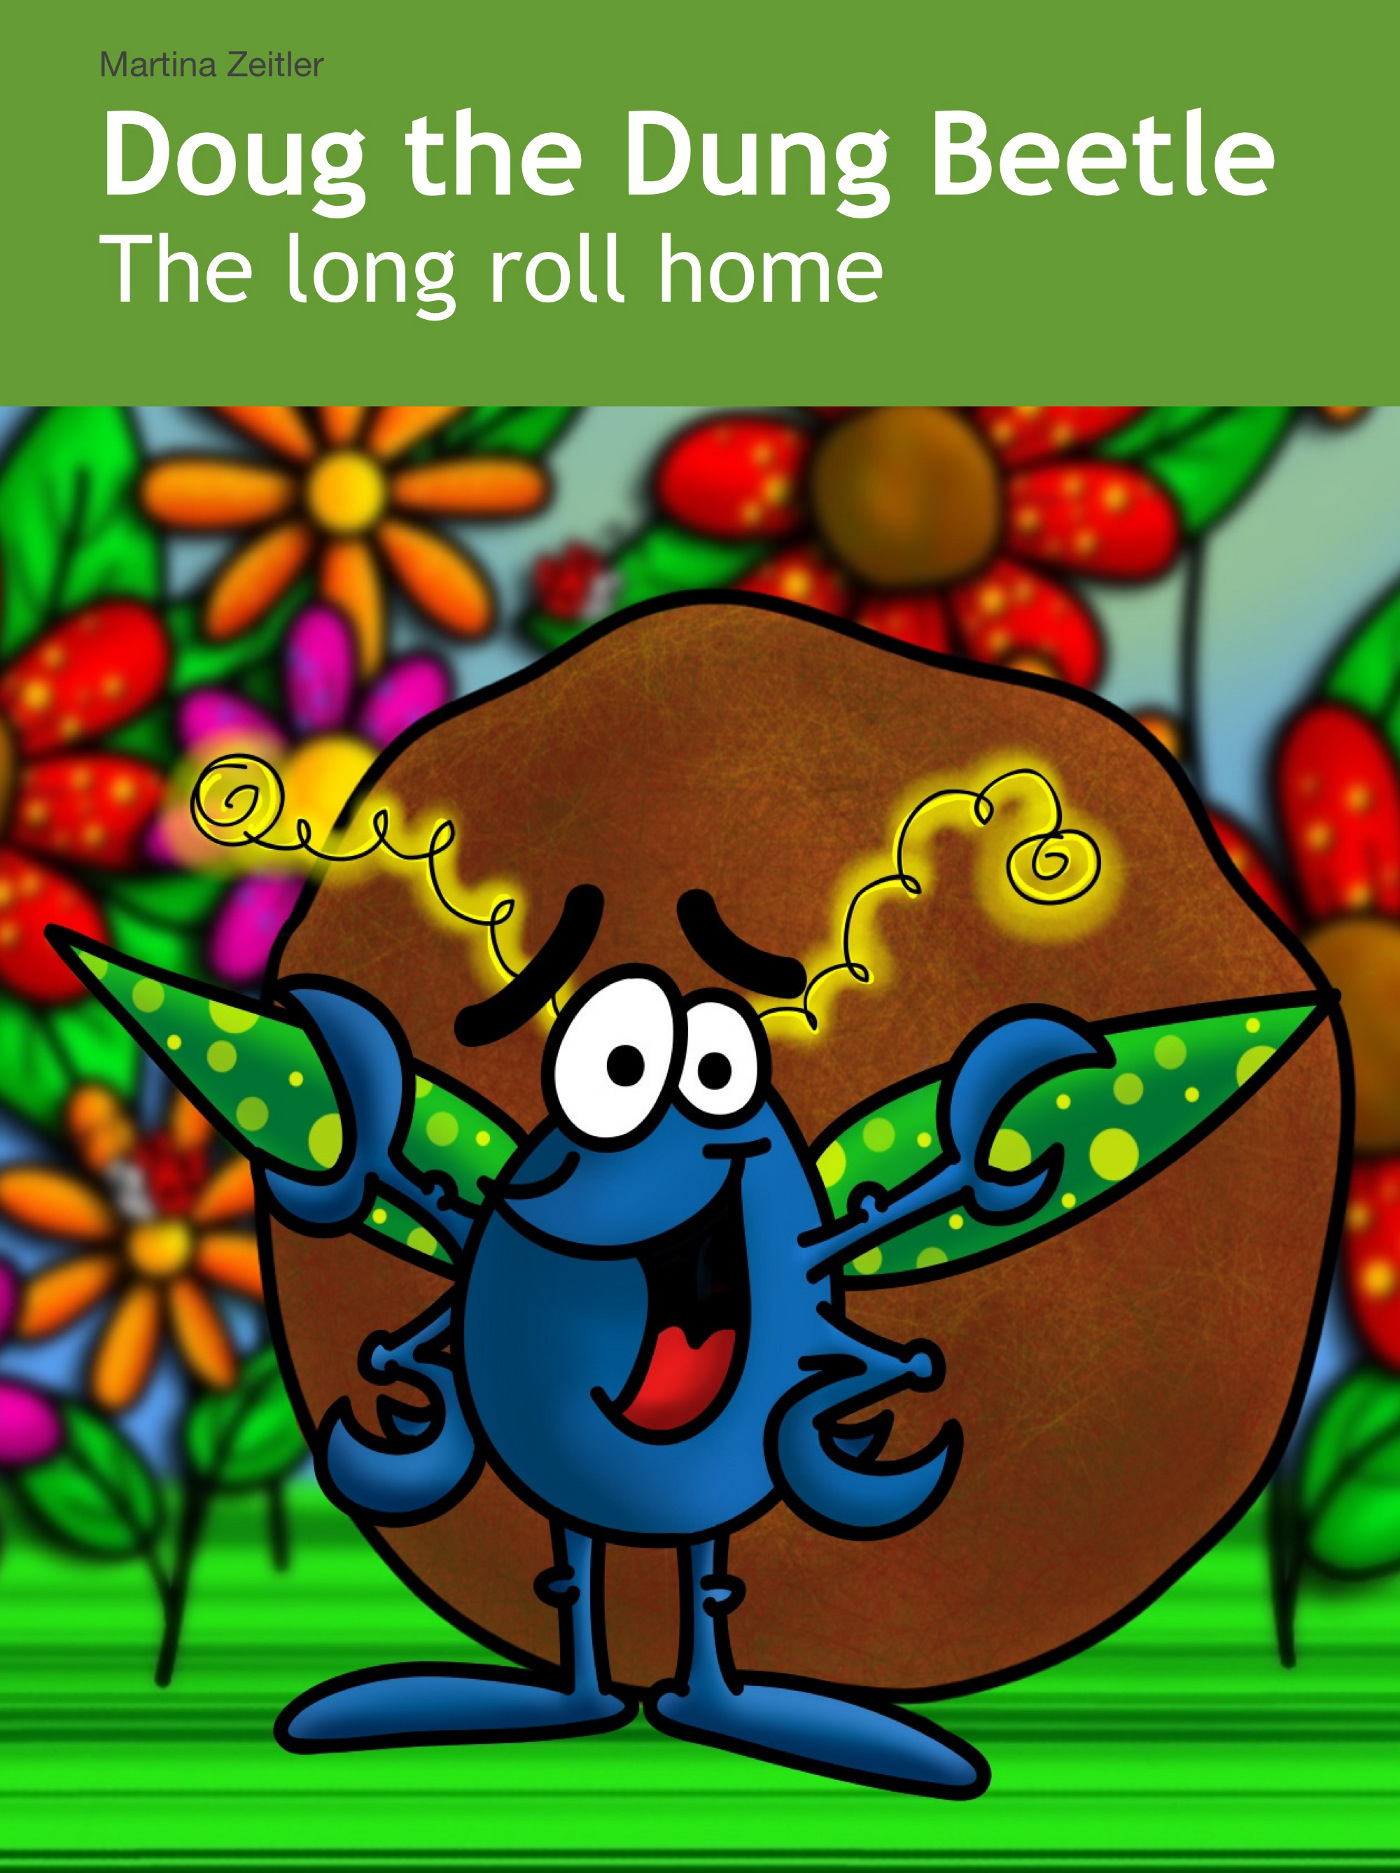 Doug the dung beetle's first book